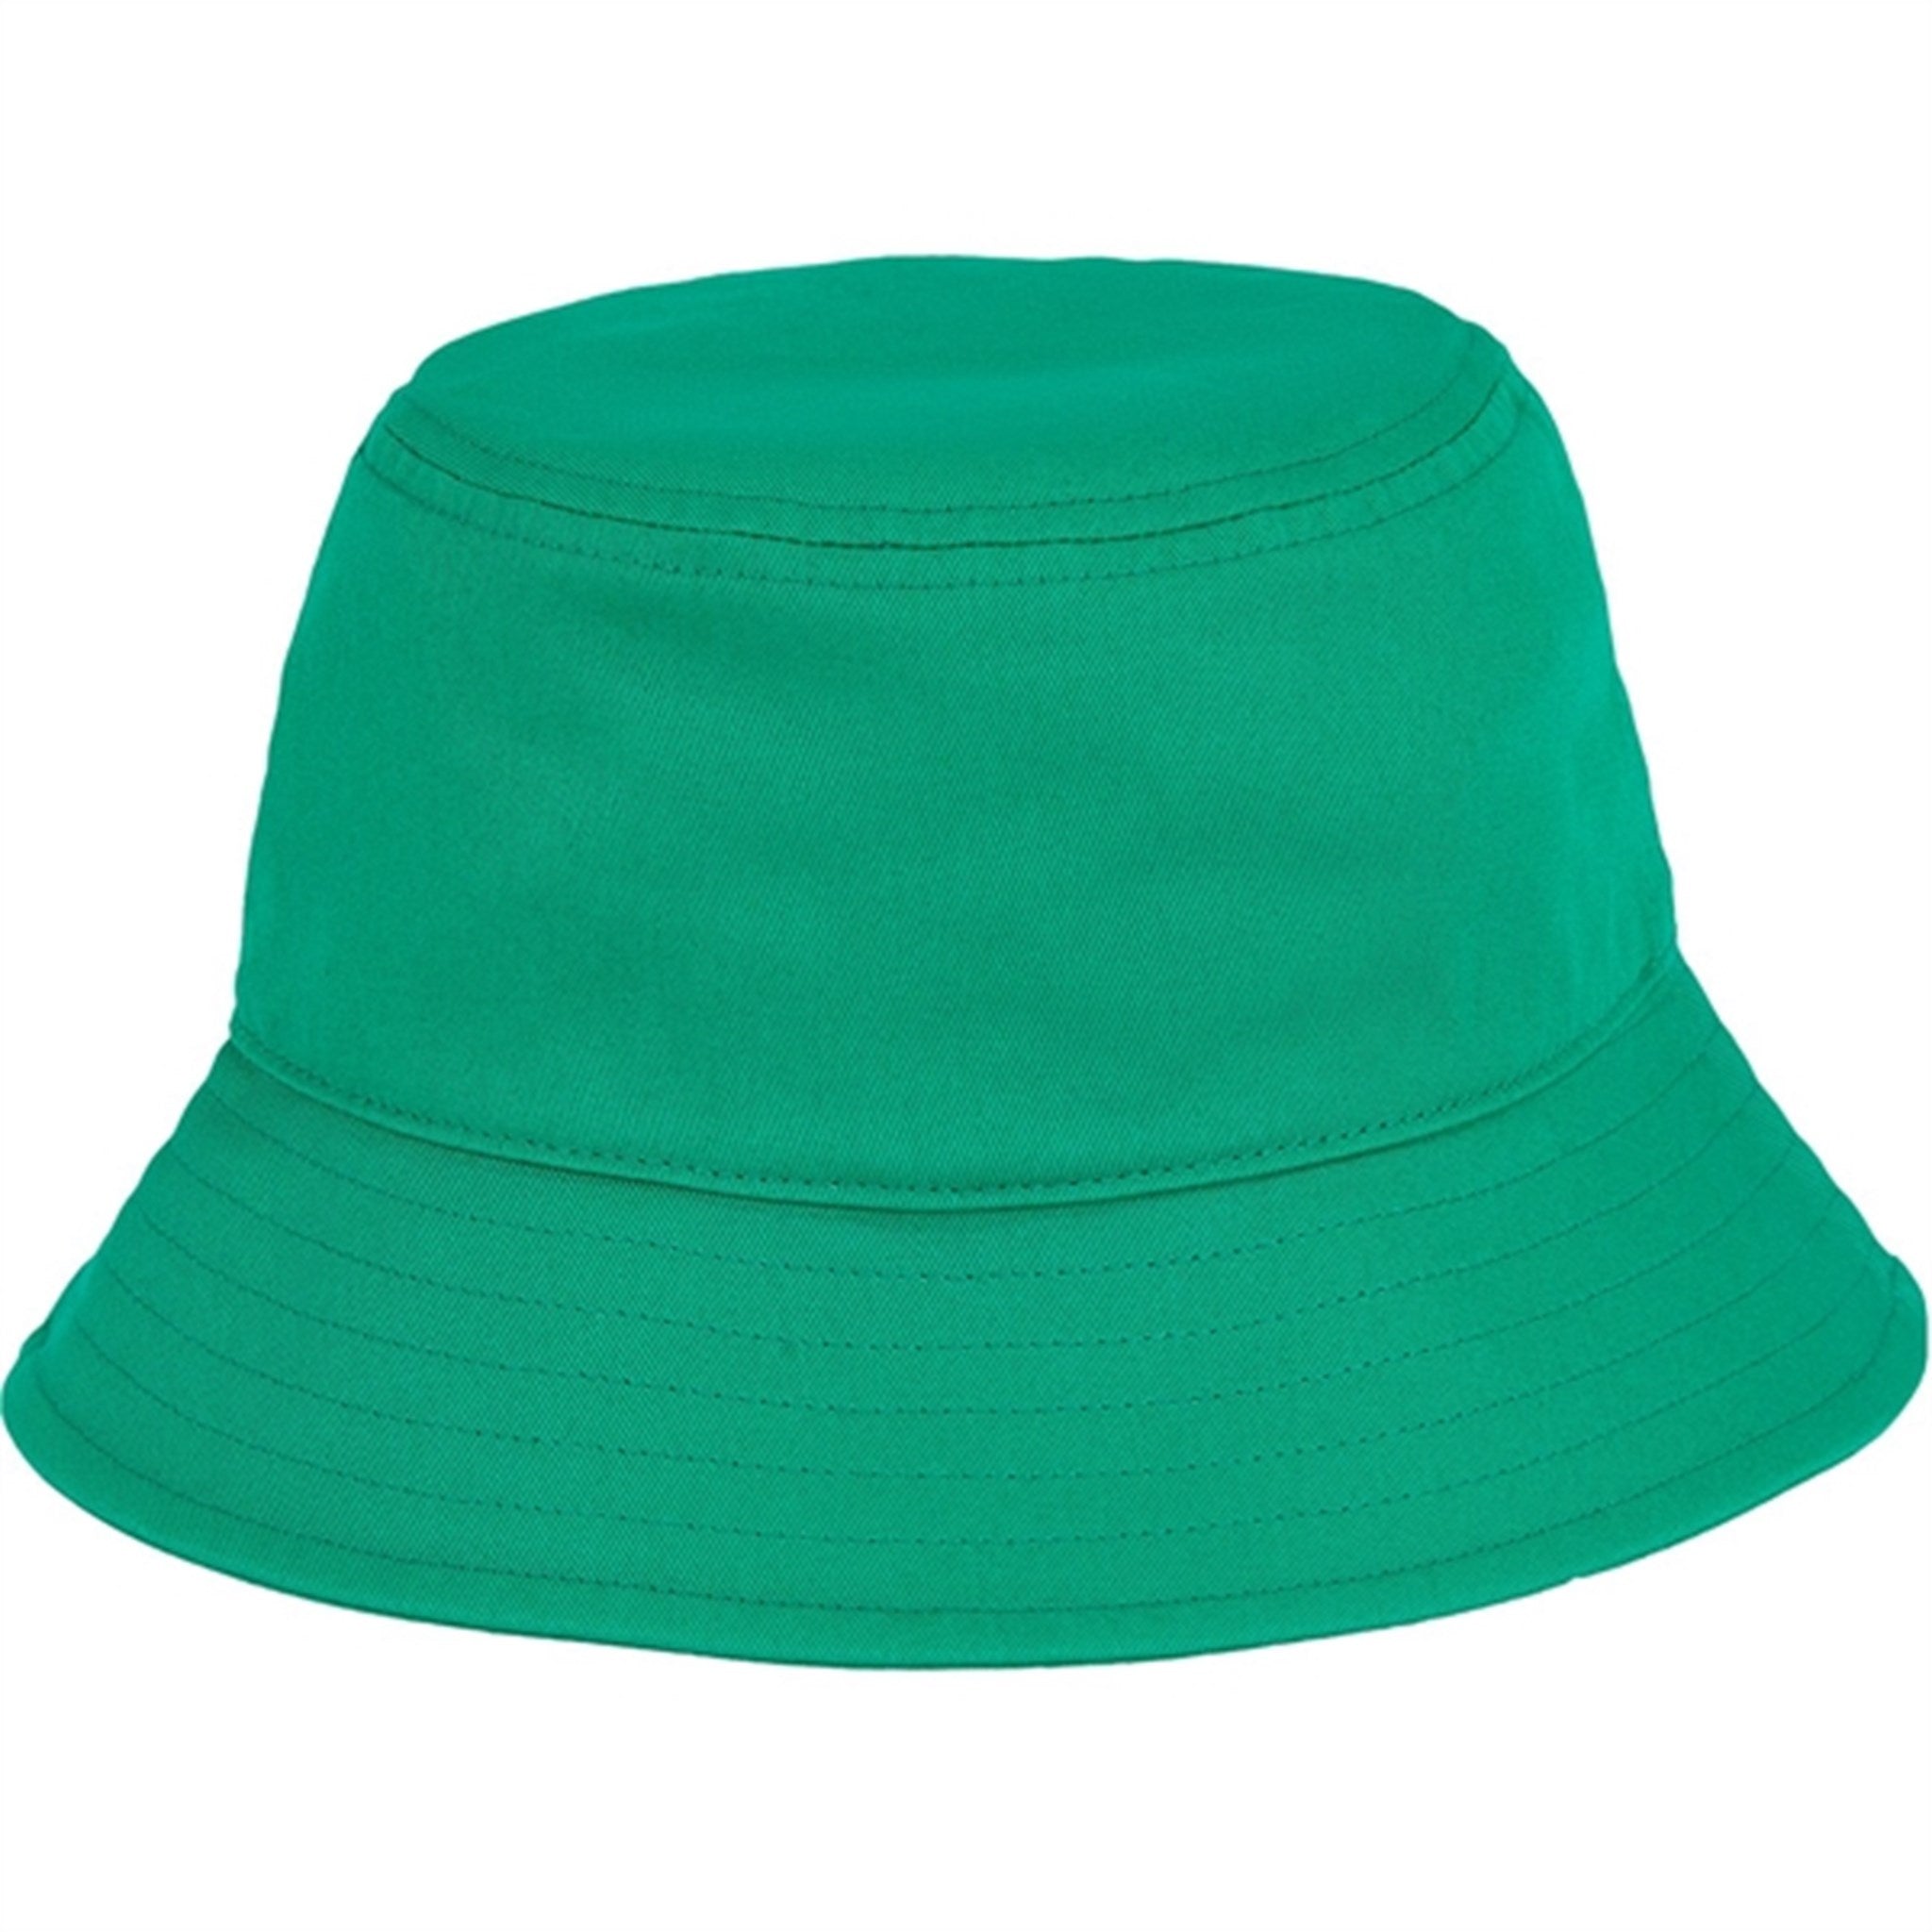 Tommy Hilfiger Th Essential Bucket Hat Olympic Green - Size S/M